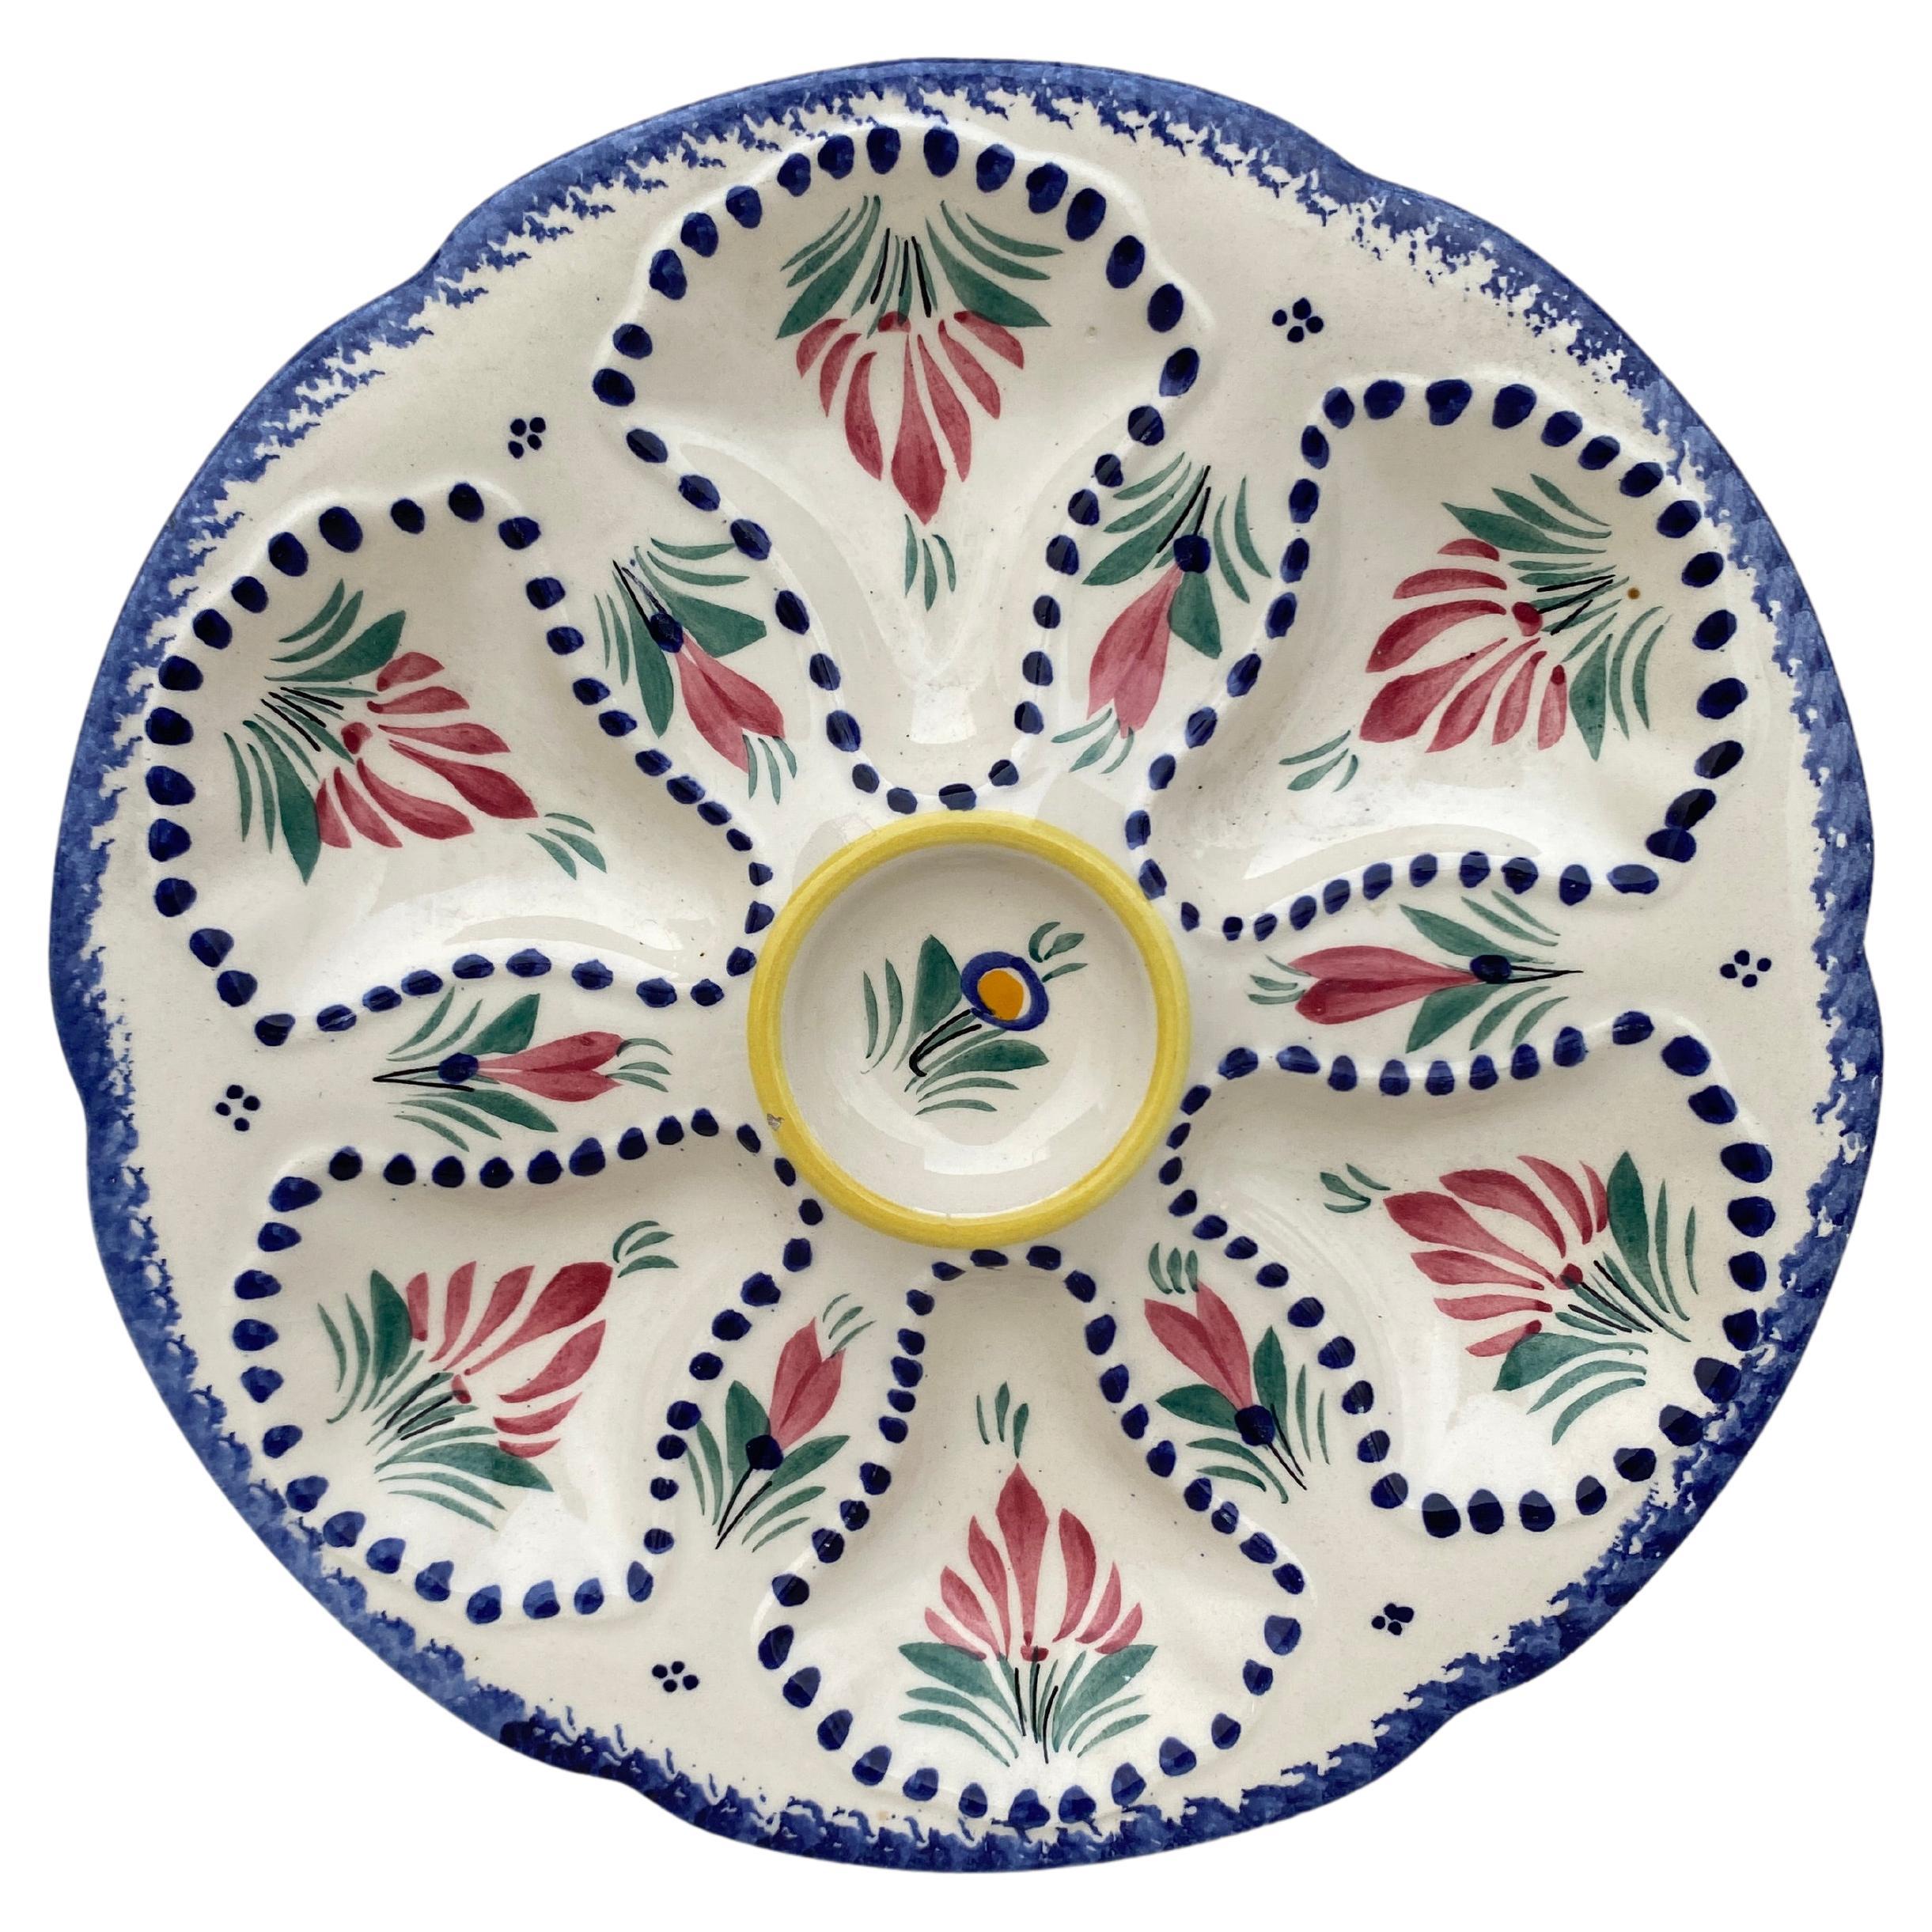 Mid-Century French Faience Oyster Plate Quimper